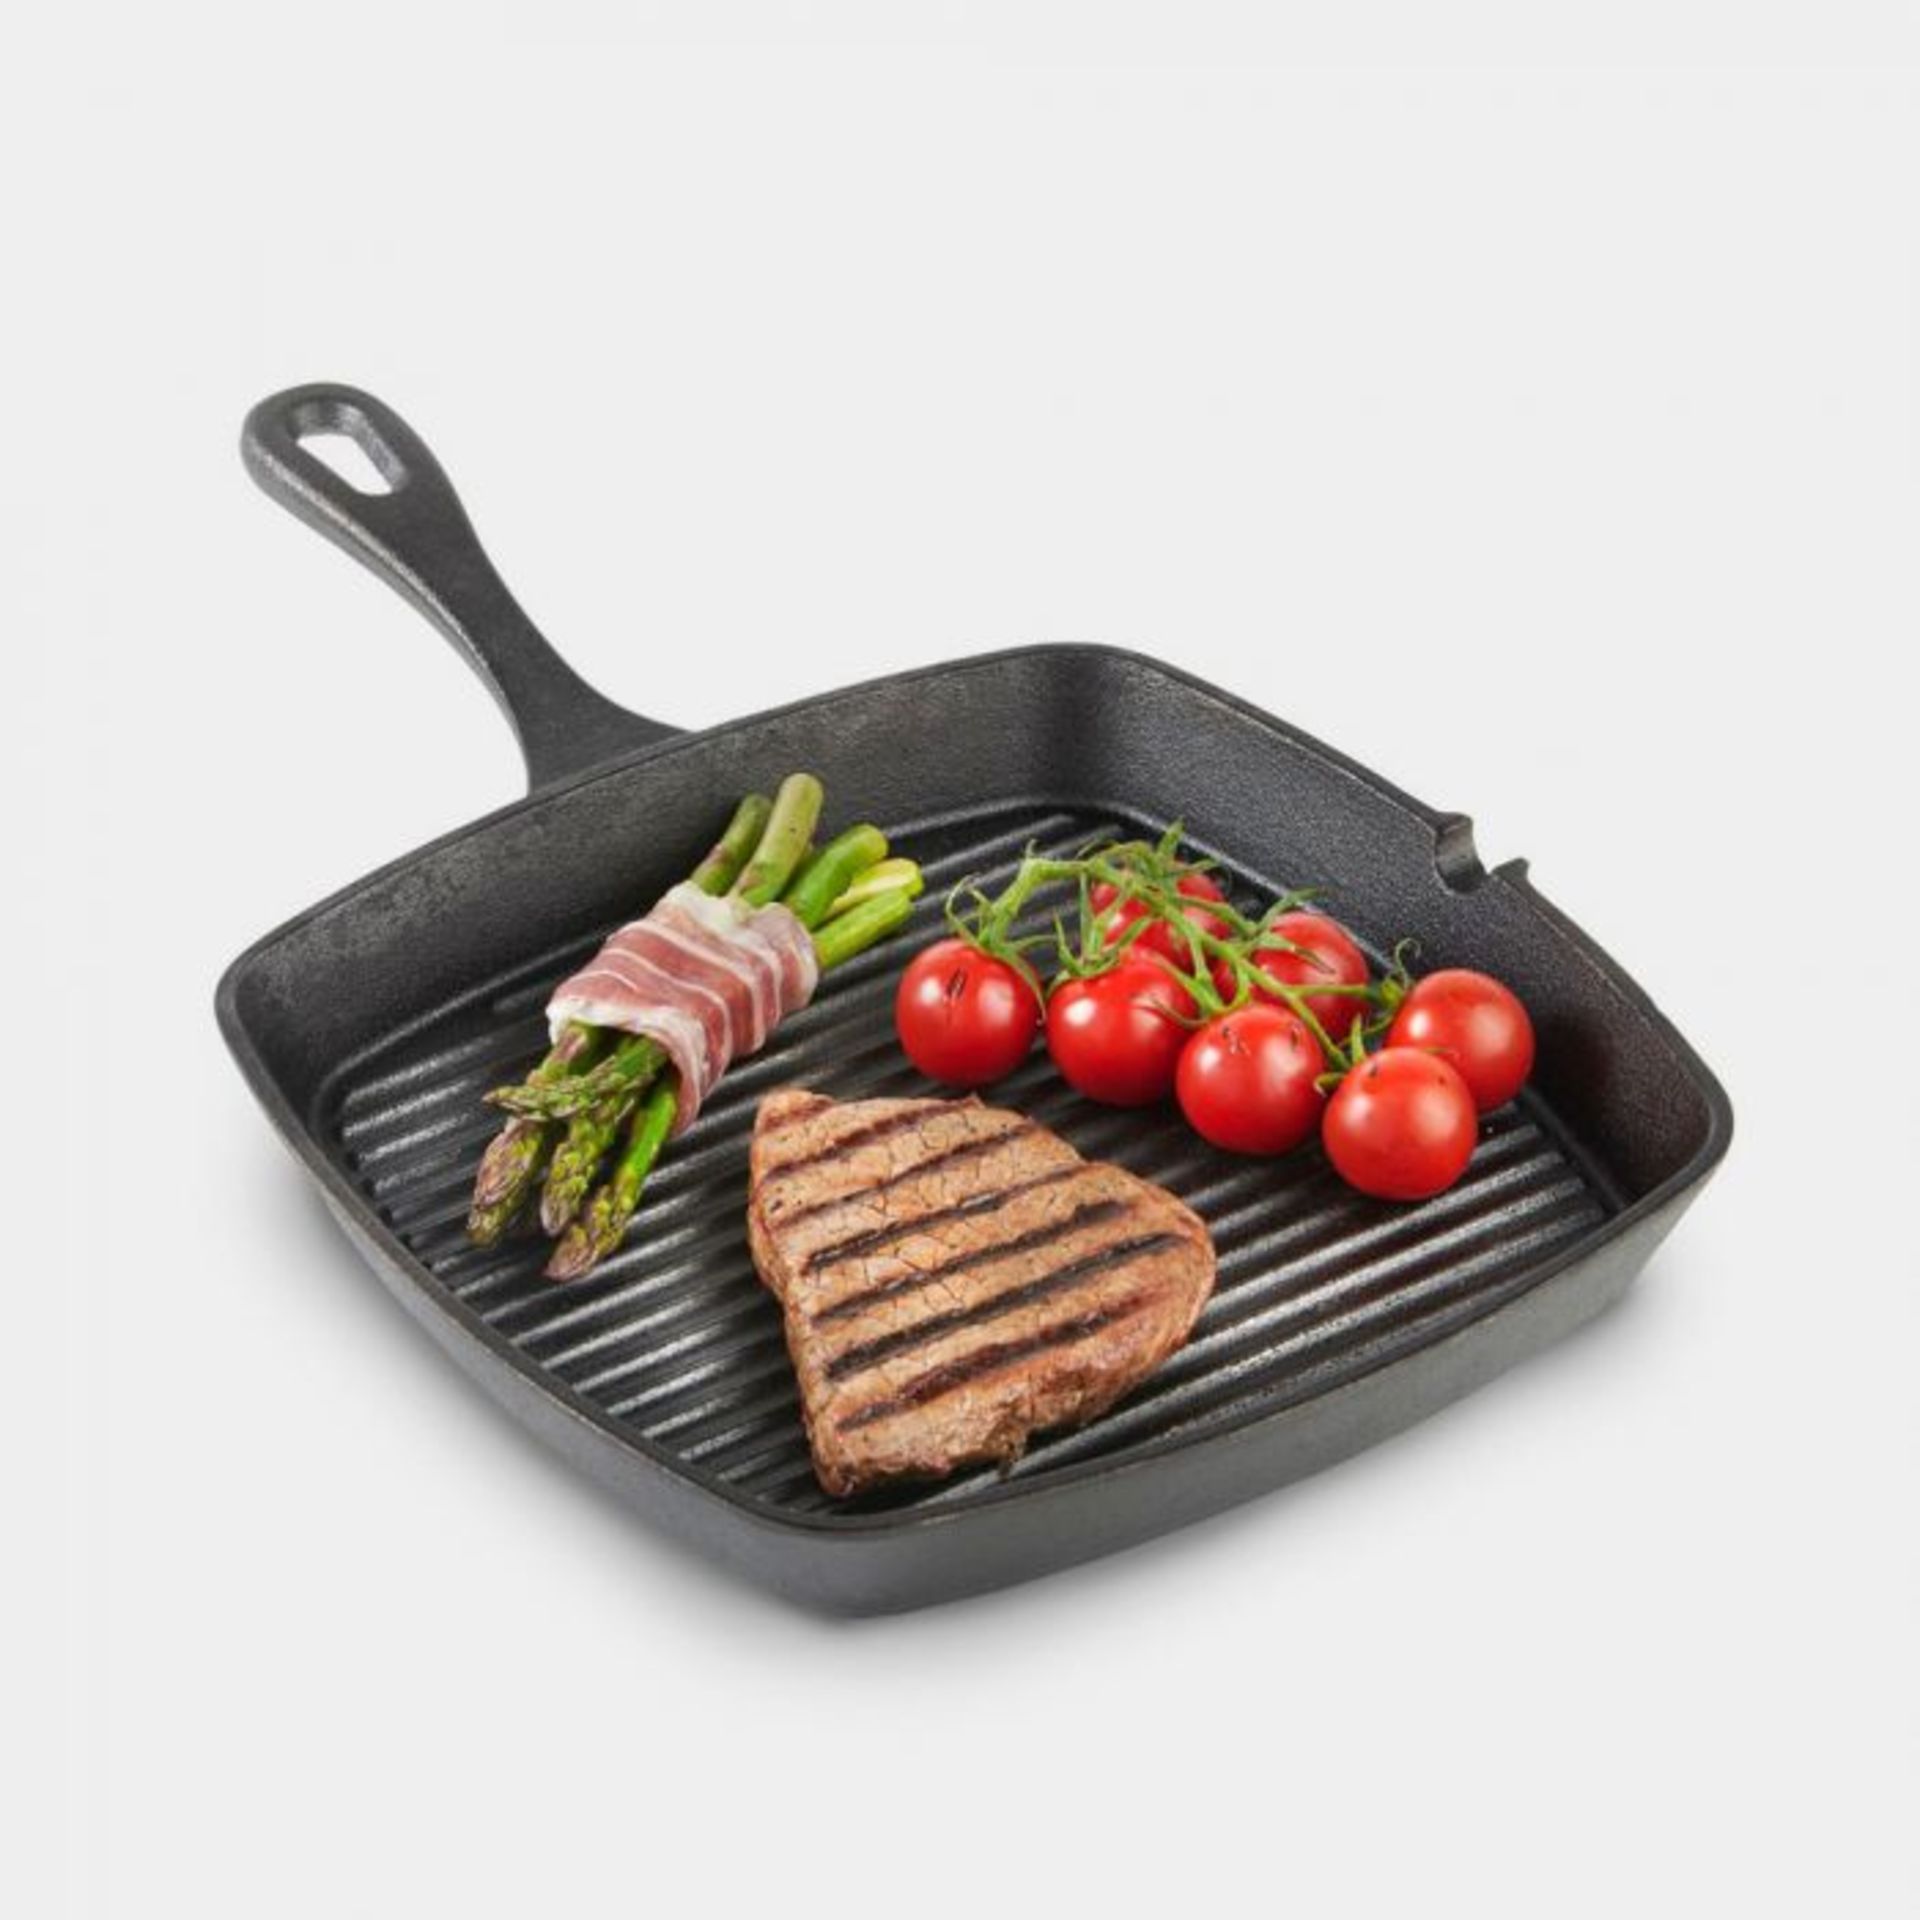 Seasoned Cast Iron Griddle Pan. Cast iron has been used as the cooking material of choice for